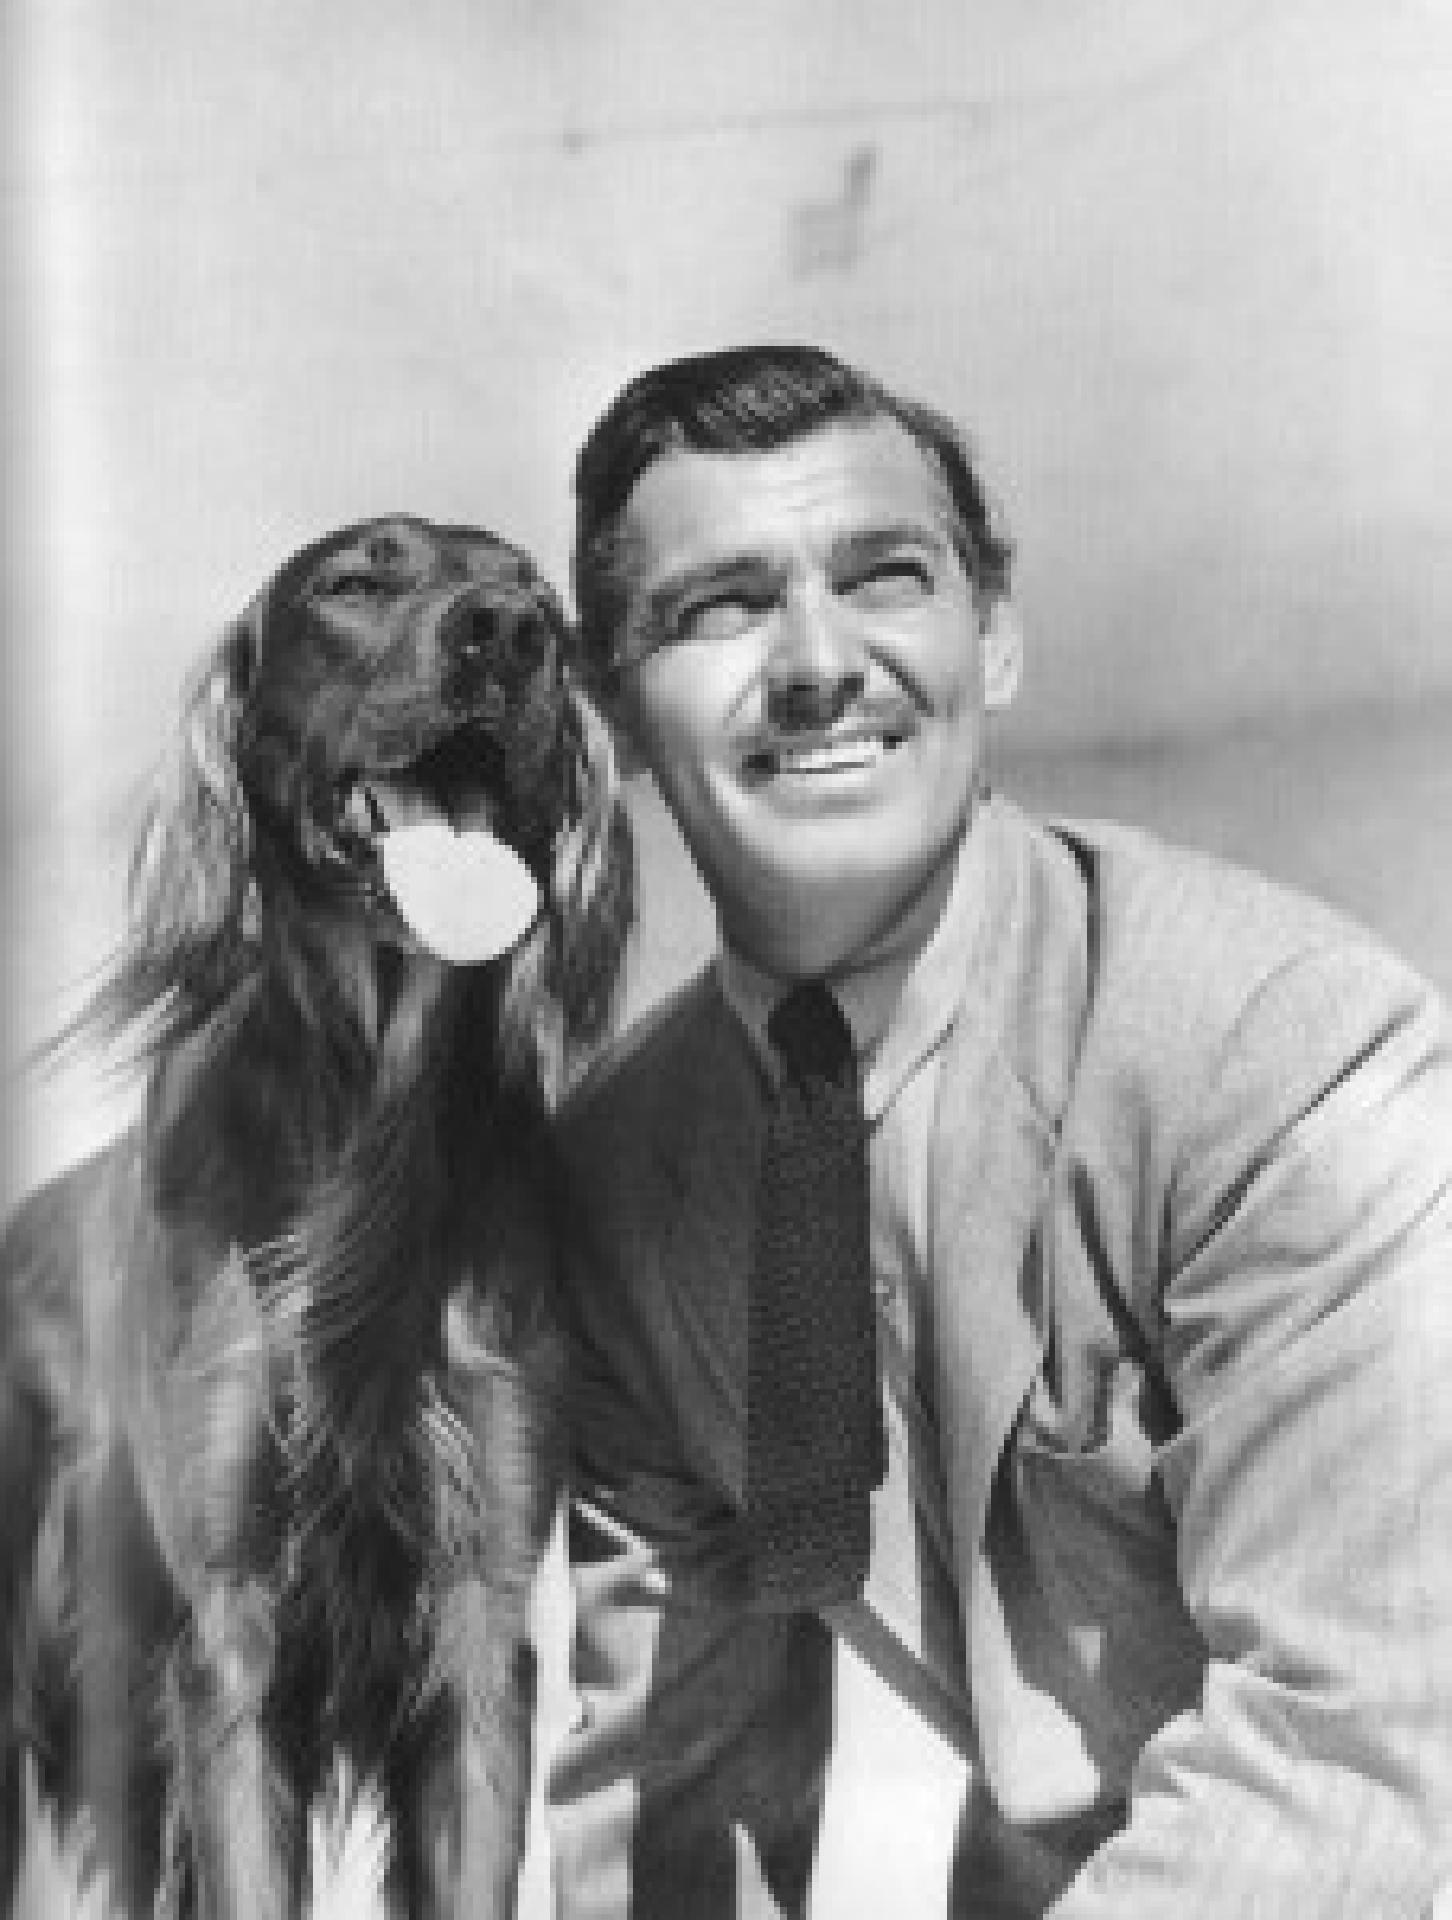 Clark Gable ud sein Setter Lord Reilly, ca. 1941